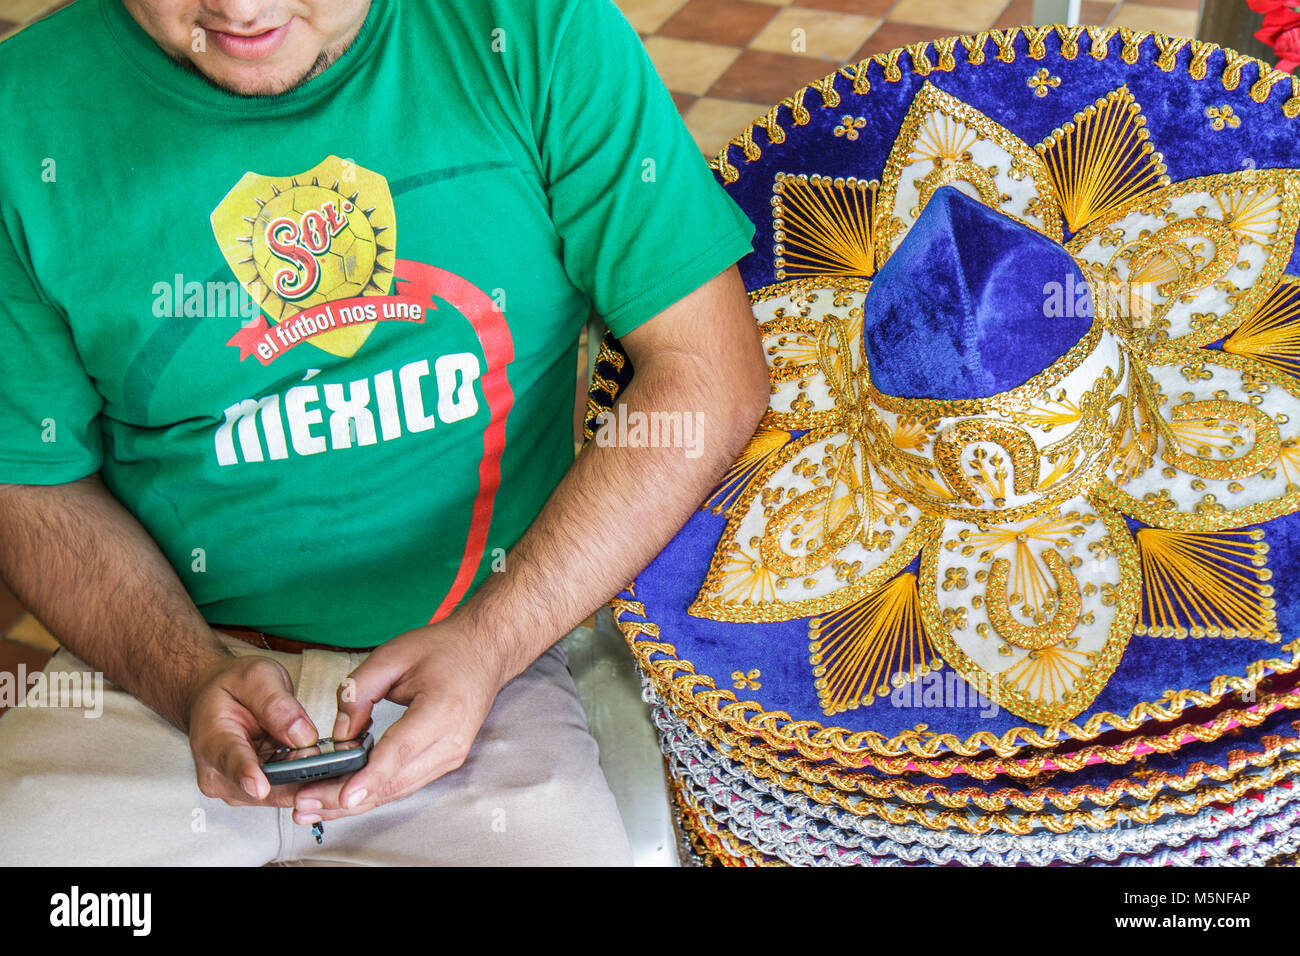 Cancun Mexico,Mexican,Mercado,market,shopping shoppers shop shops buying selling,store stores business businesses,gift shop,souvenir,mariachi hat,fanc Stock Photo